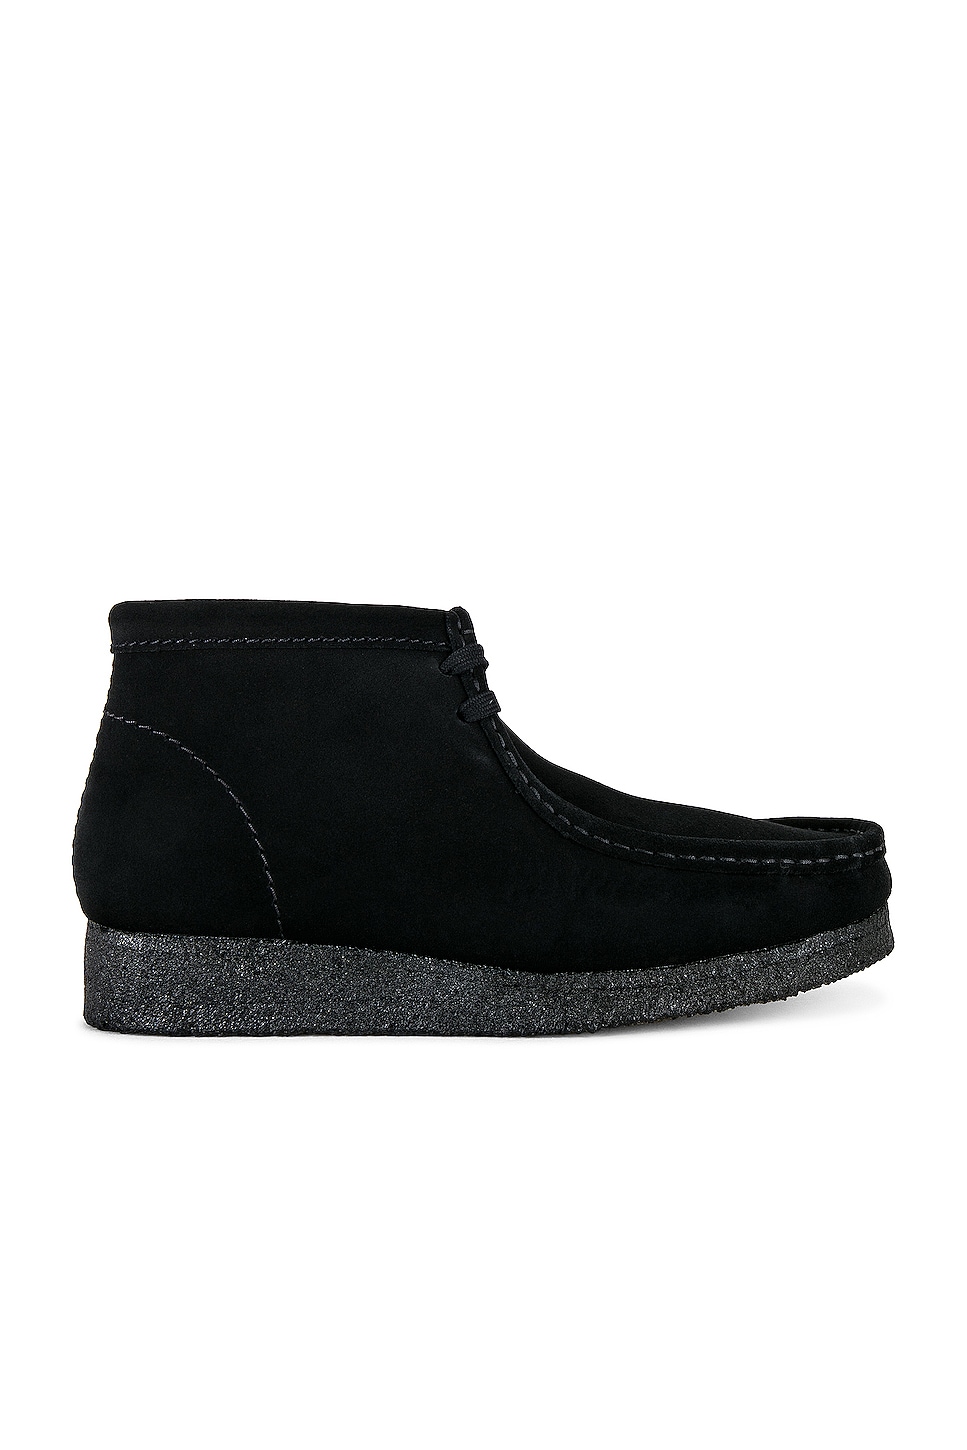 Image 1 of Clarks Wallabee Boot in Black